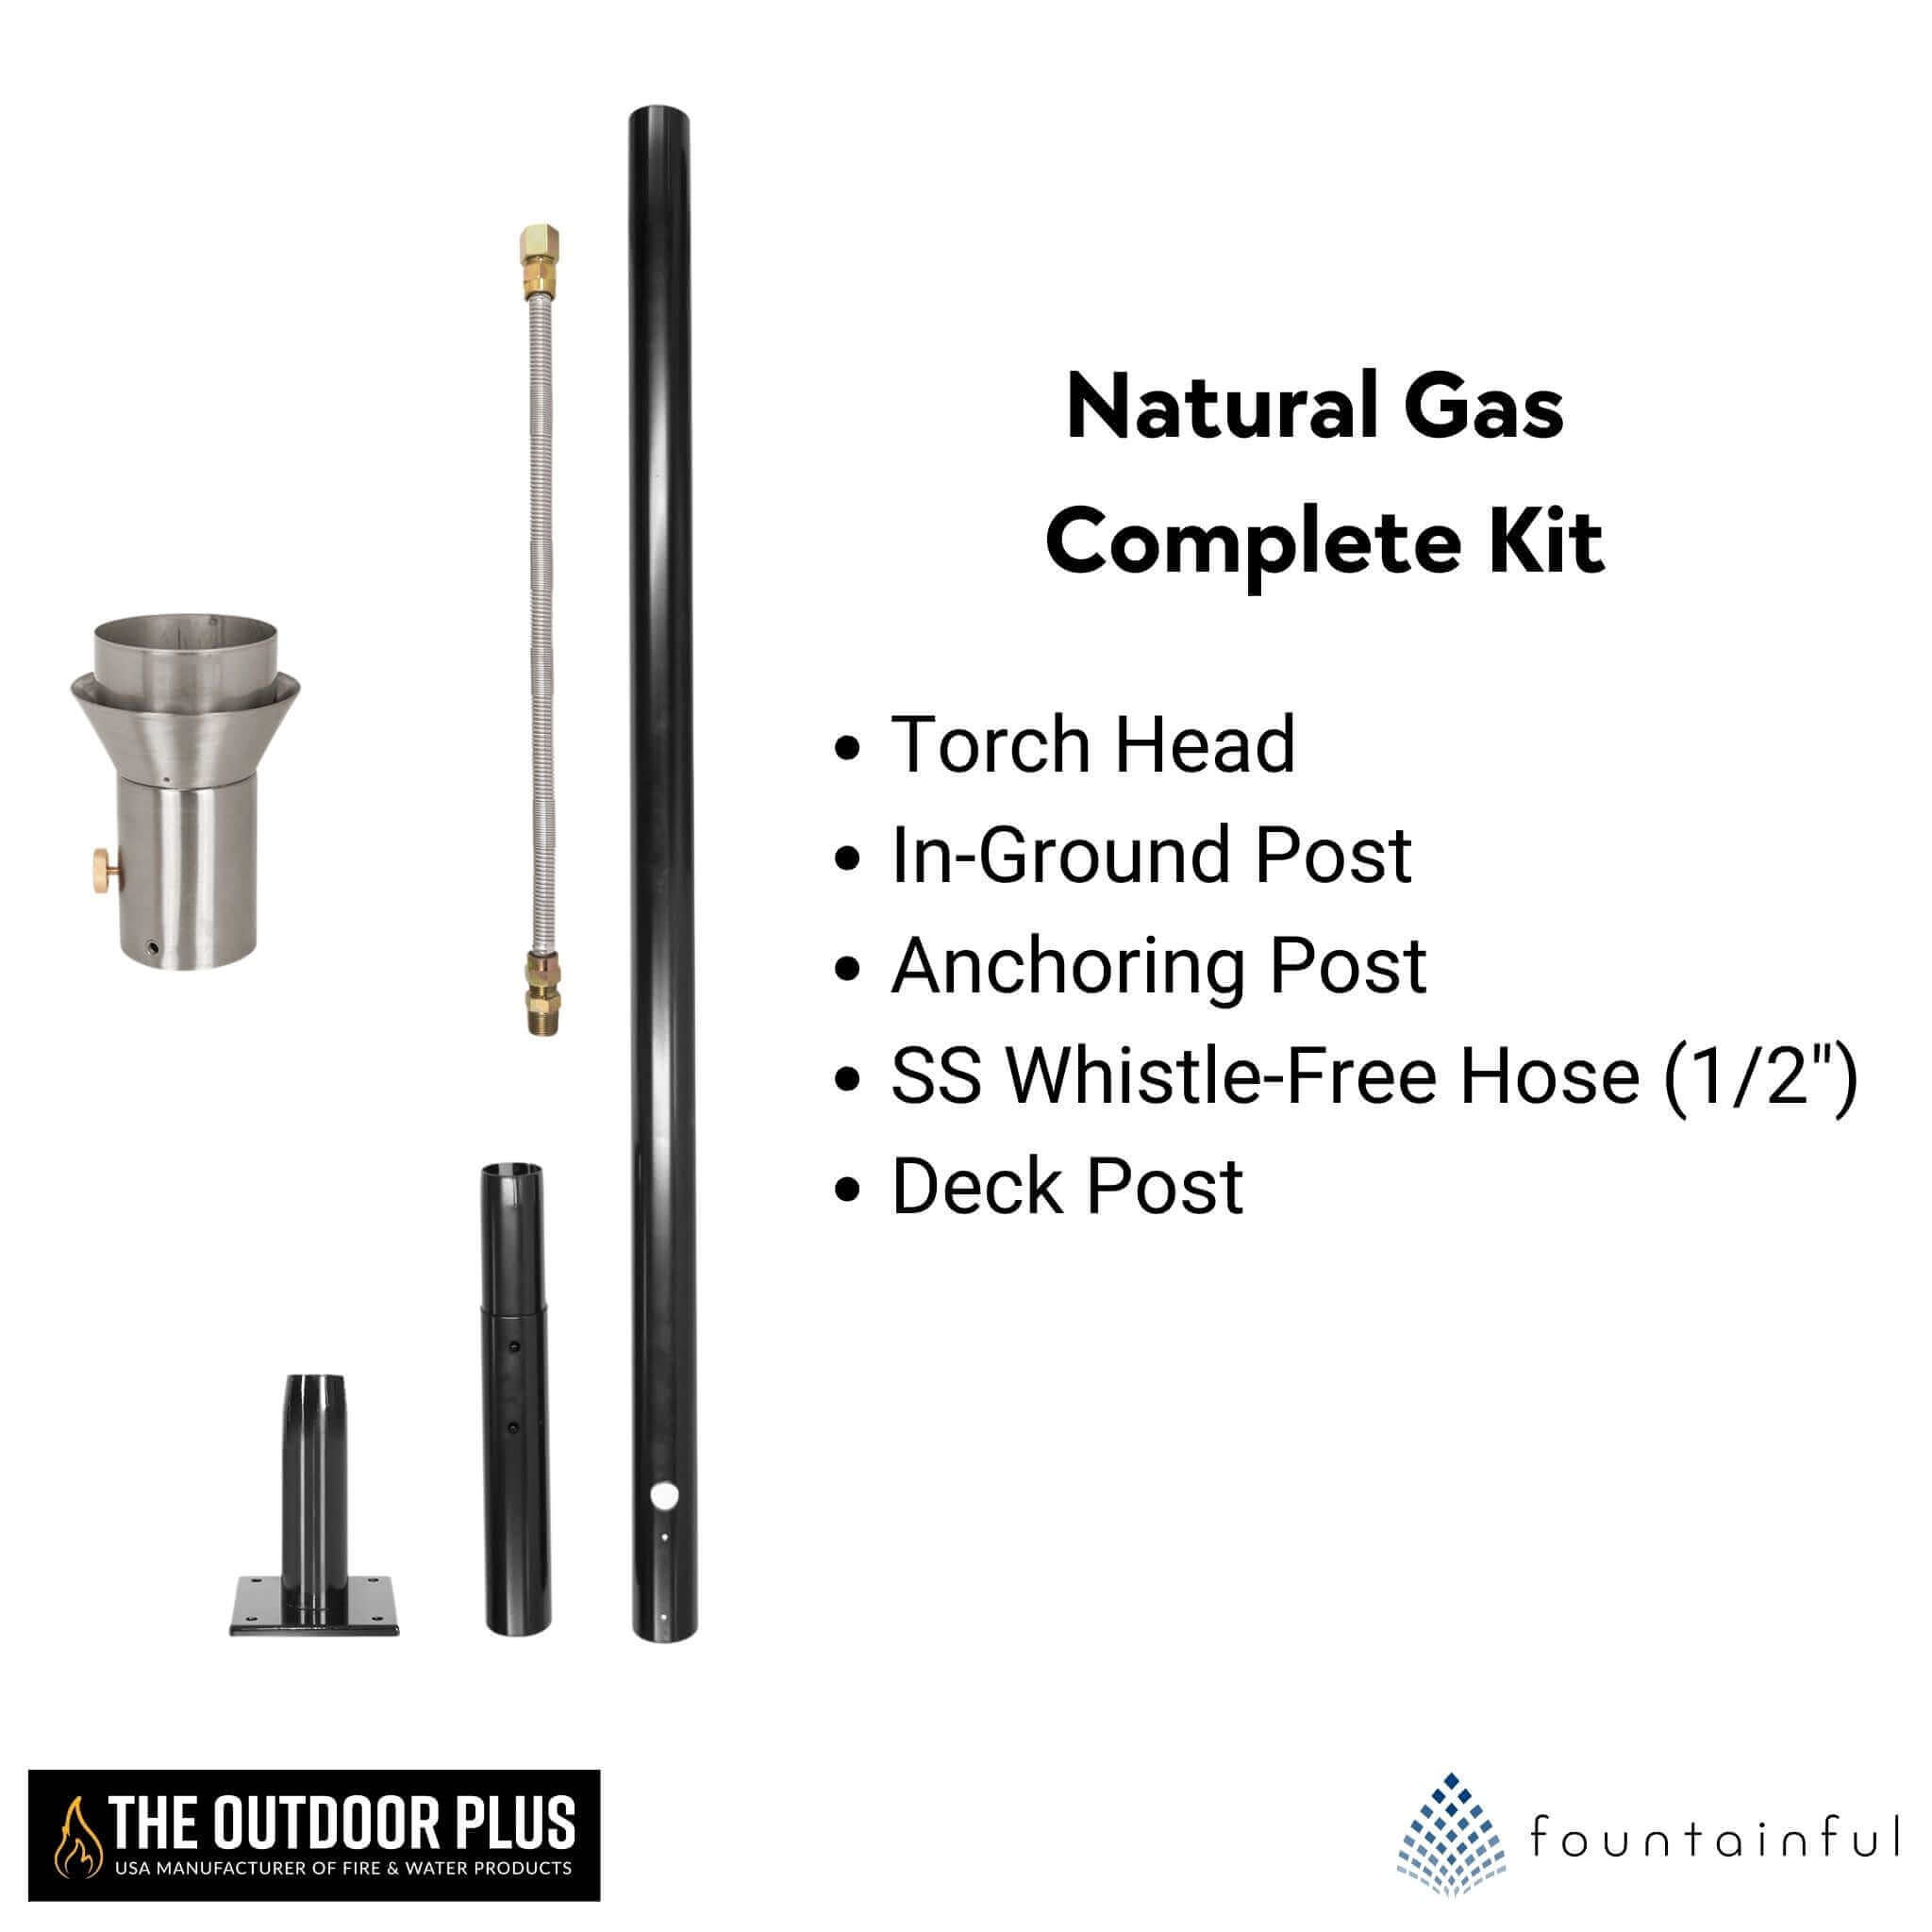 Diamond Plate Fire Torch COMPLETE KIT - Stainless Steel - The Outdoor Plus